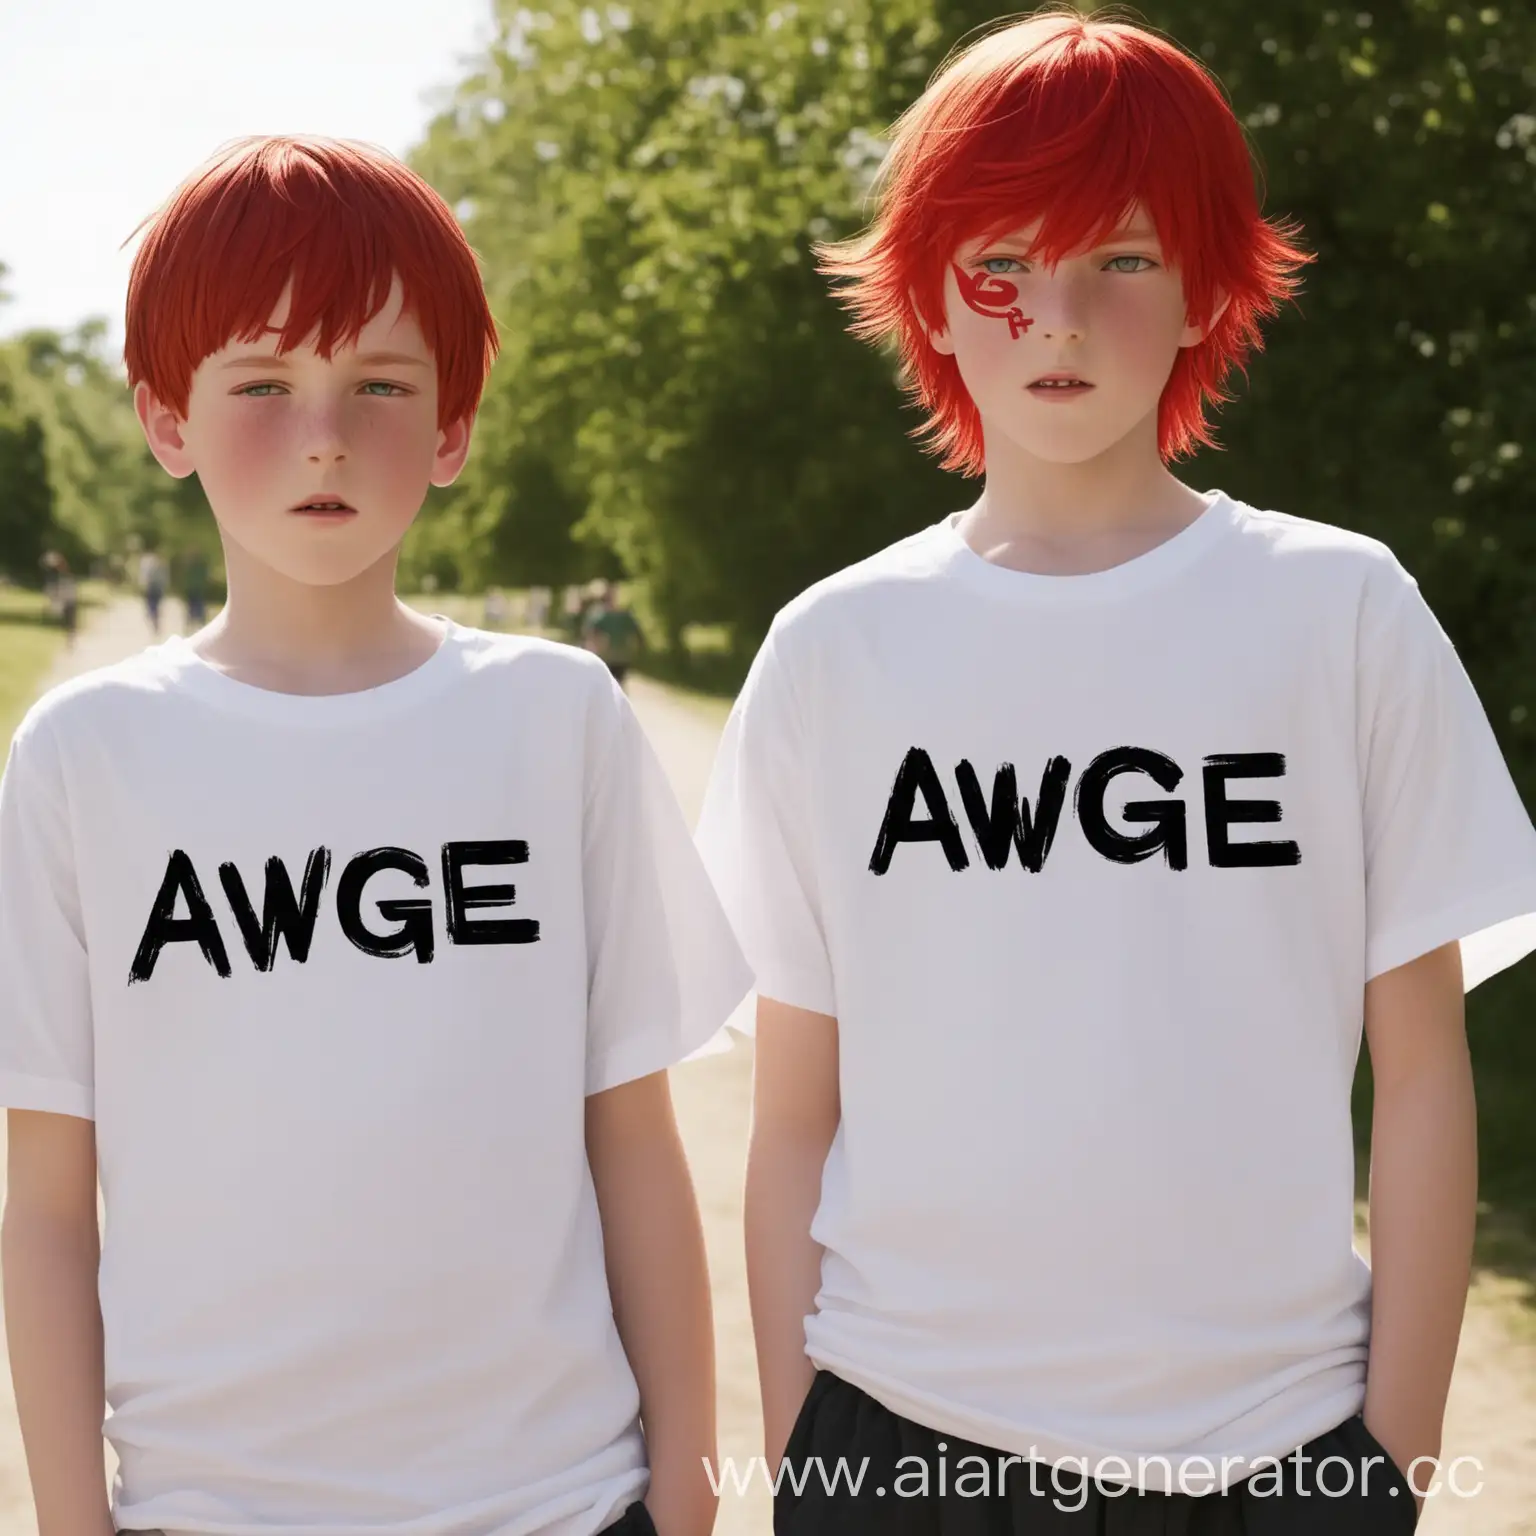 Two-Boys-with-Red-Hair-Wearing-AWGE-TShirts-in-a-Park-Setting